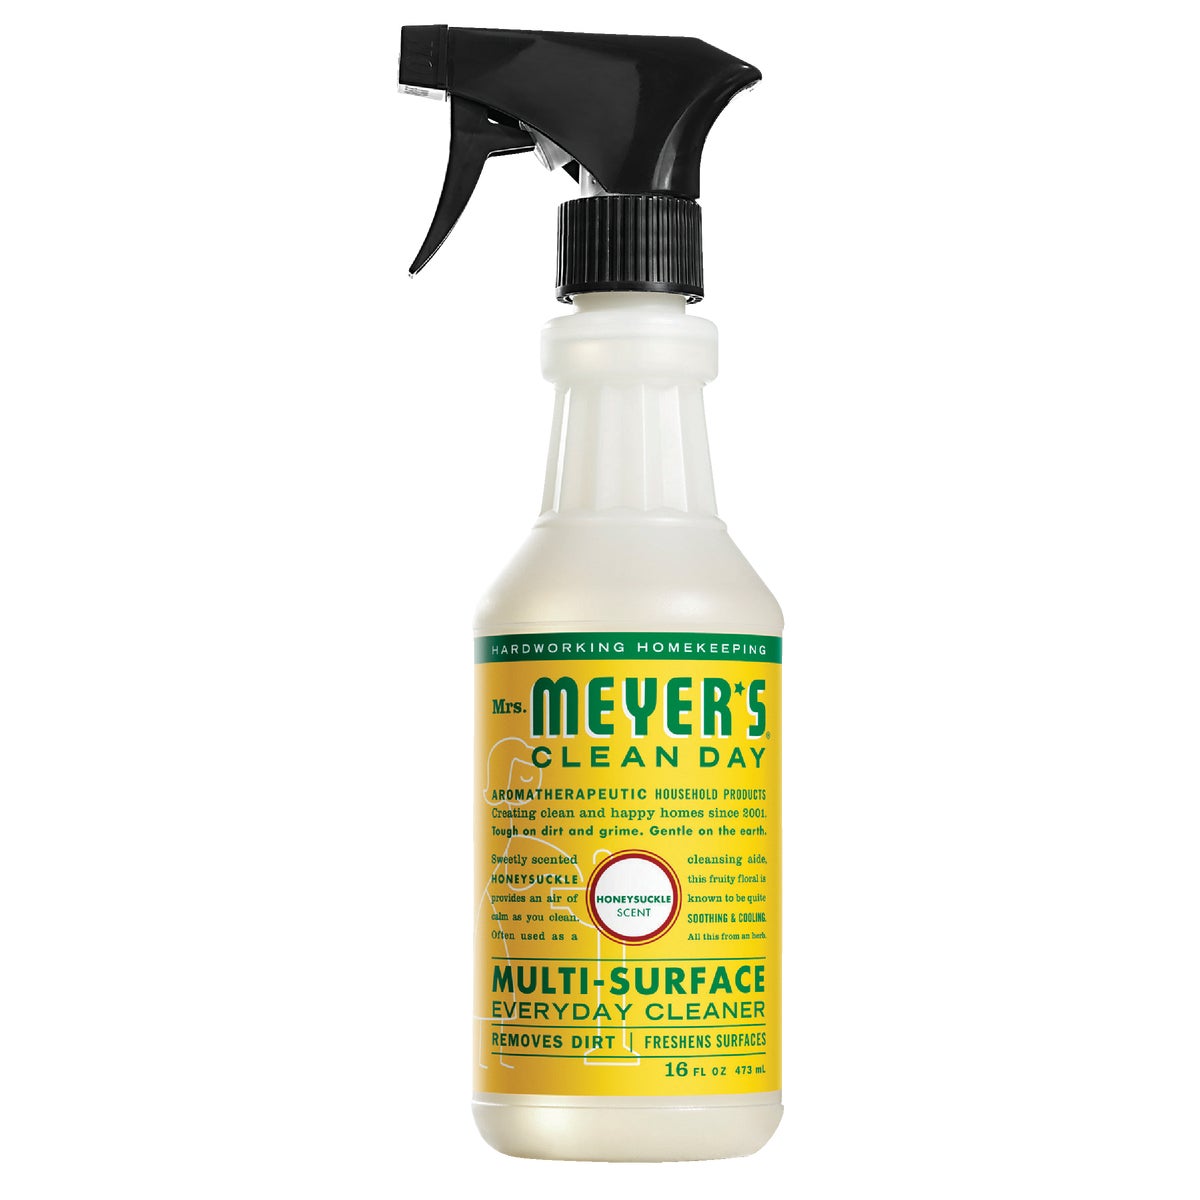 Mrs. Meyer's Clean Day 16 Oz. Honeysuckle Multi-Surface Everyday Cleaner